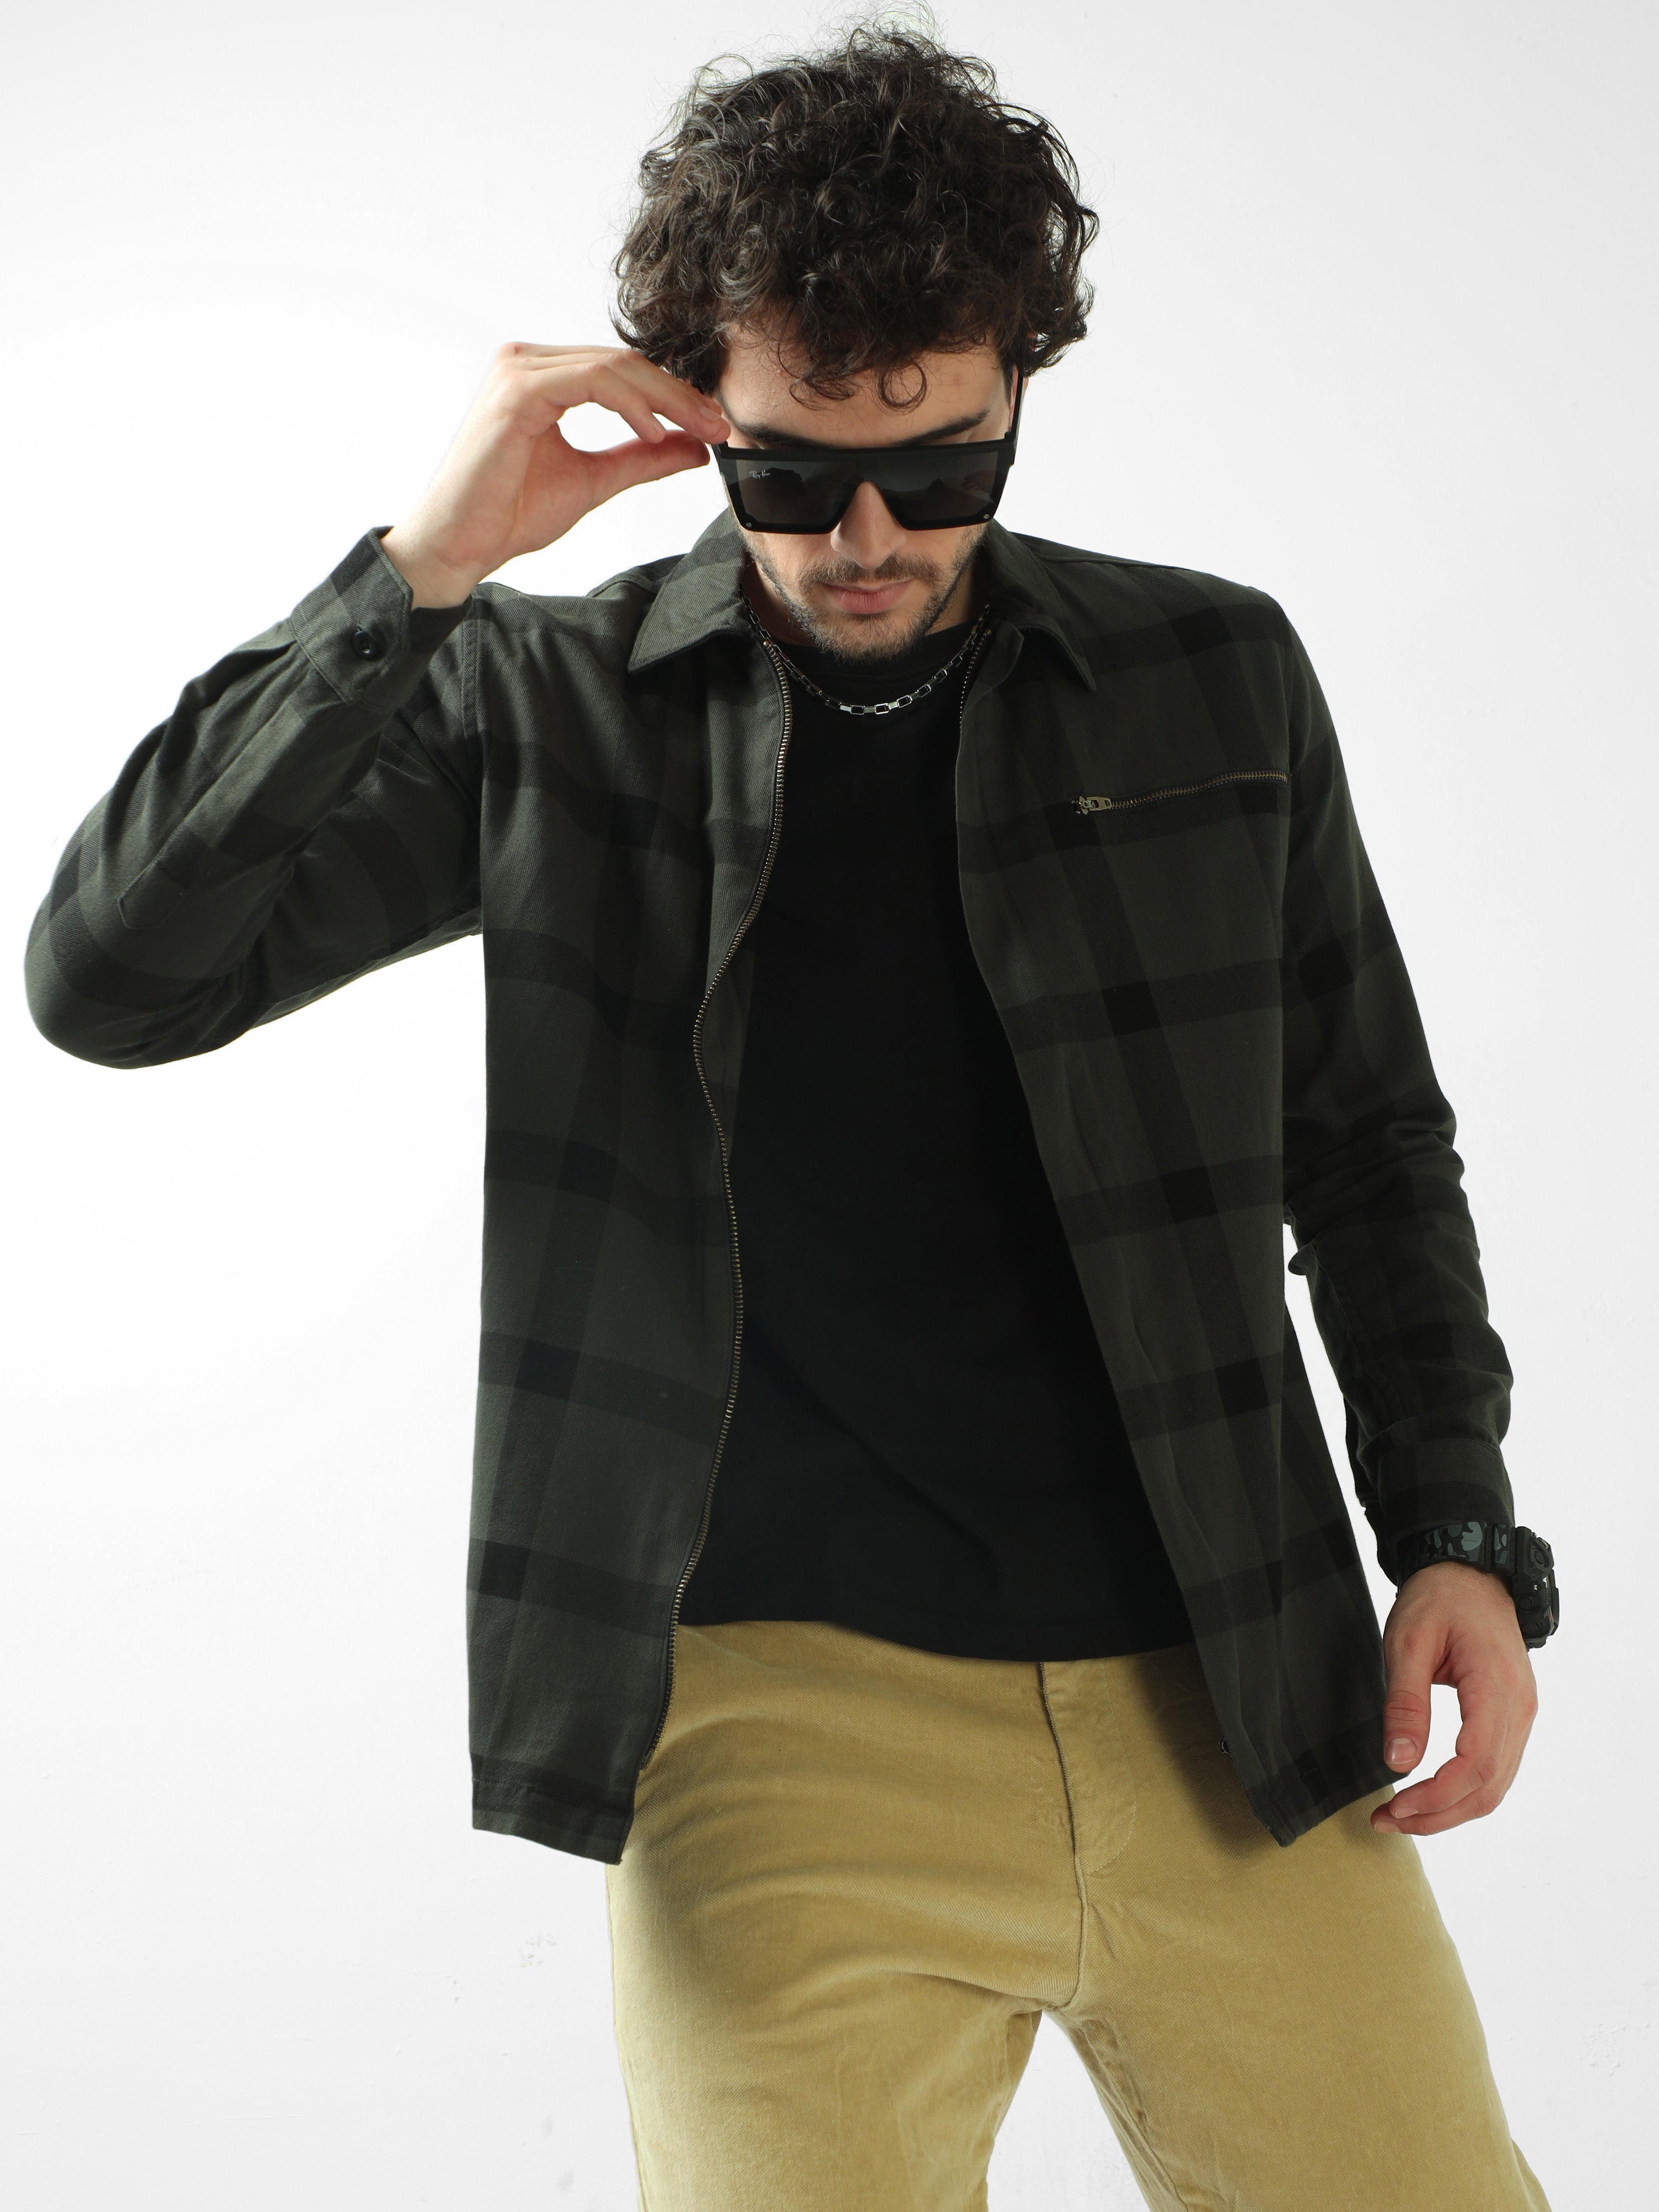 Buy Latest Moss Green Check Shirt Online at Great PriceRs. 1499.00